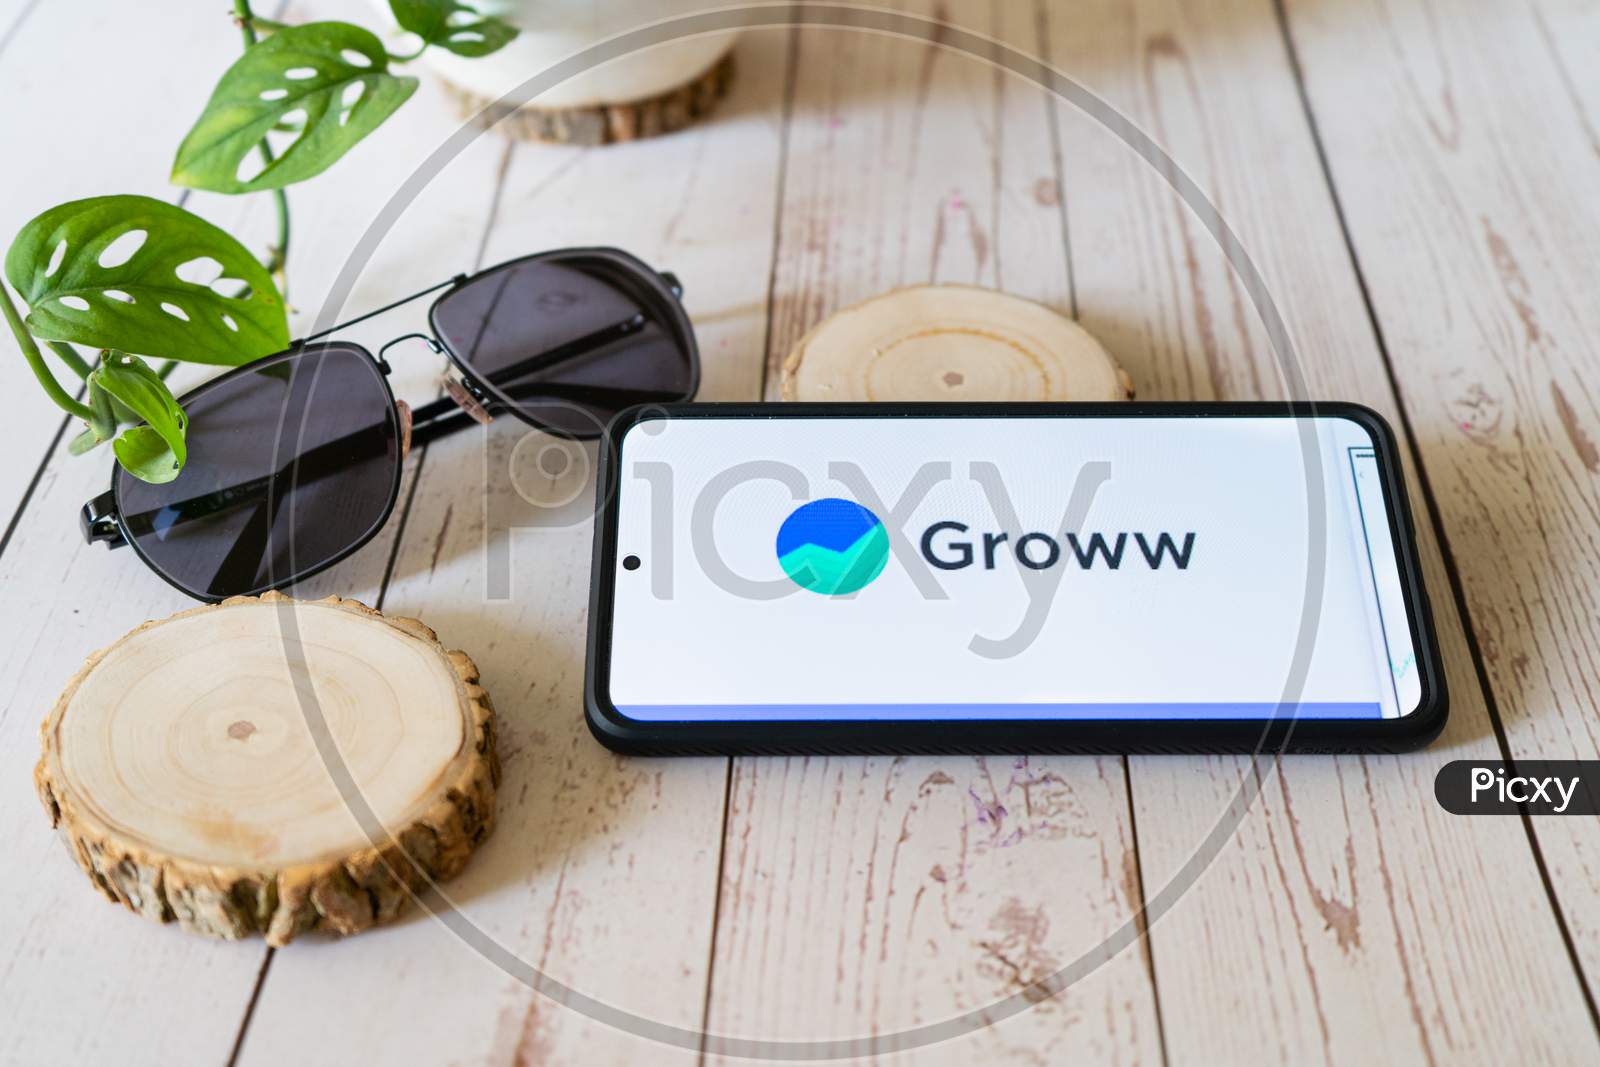 Indian Startup Unicorn App Groww Funded Recenlty On A Phone Placed On A Wooden Table With Sunglasses Nearby Provides An Easy Way To Buy Mutual Funds Easily And Directly For Investment And Investing